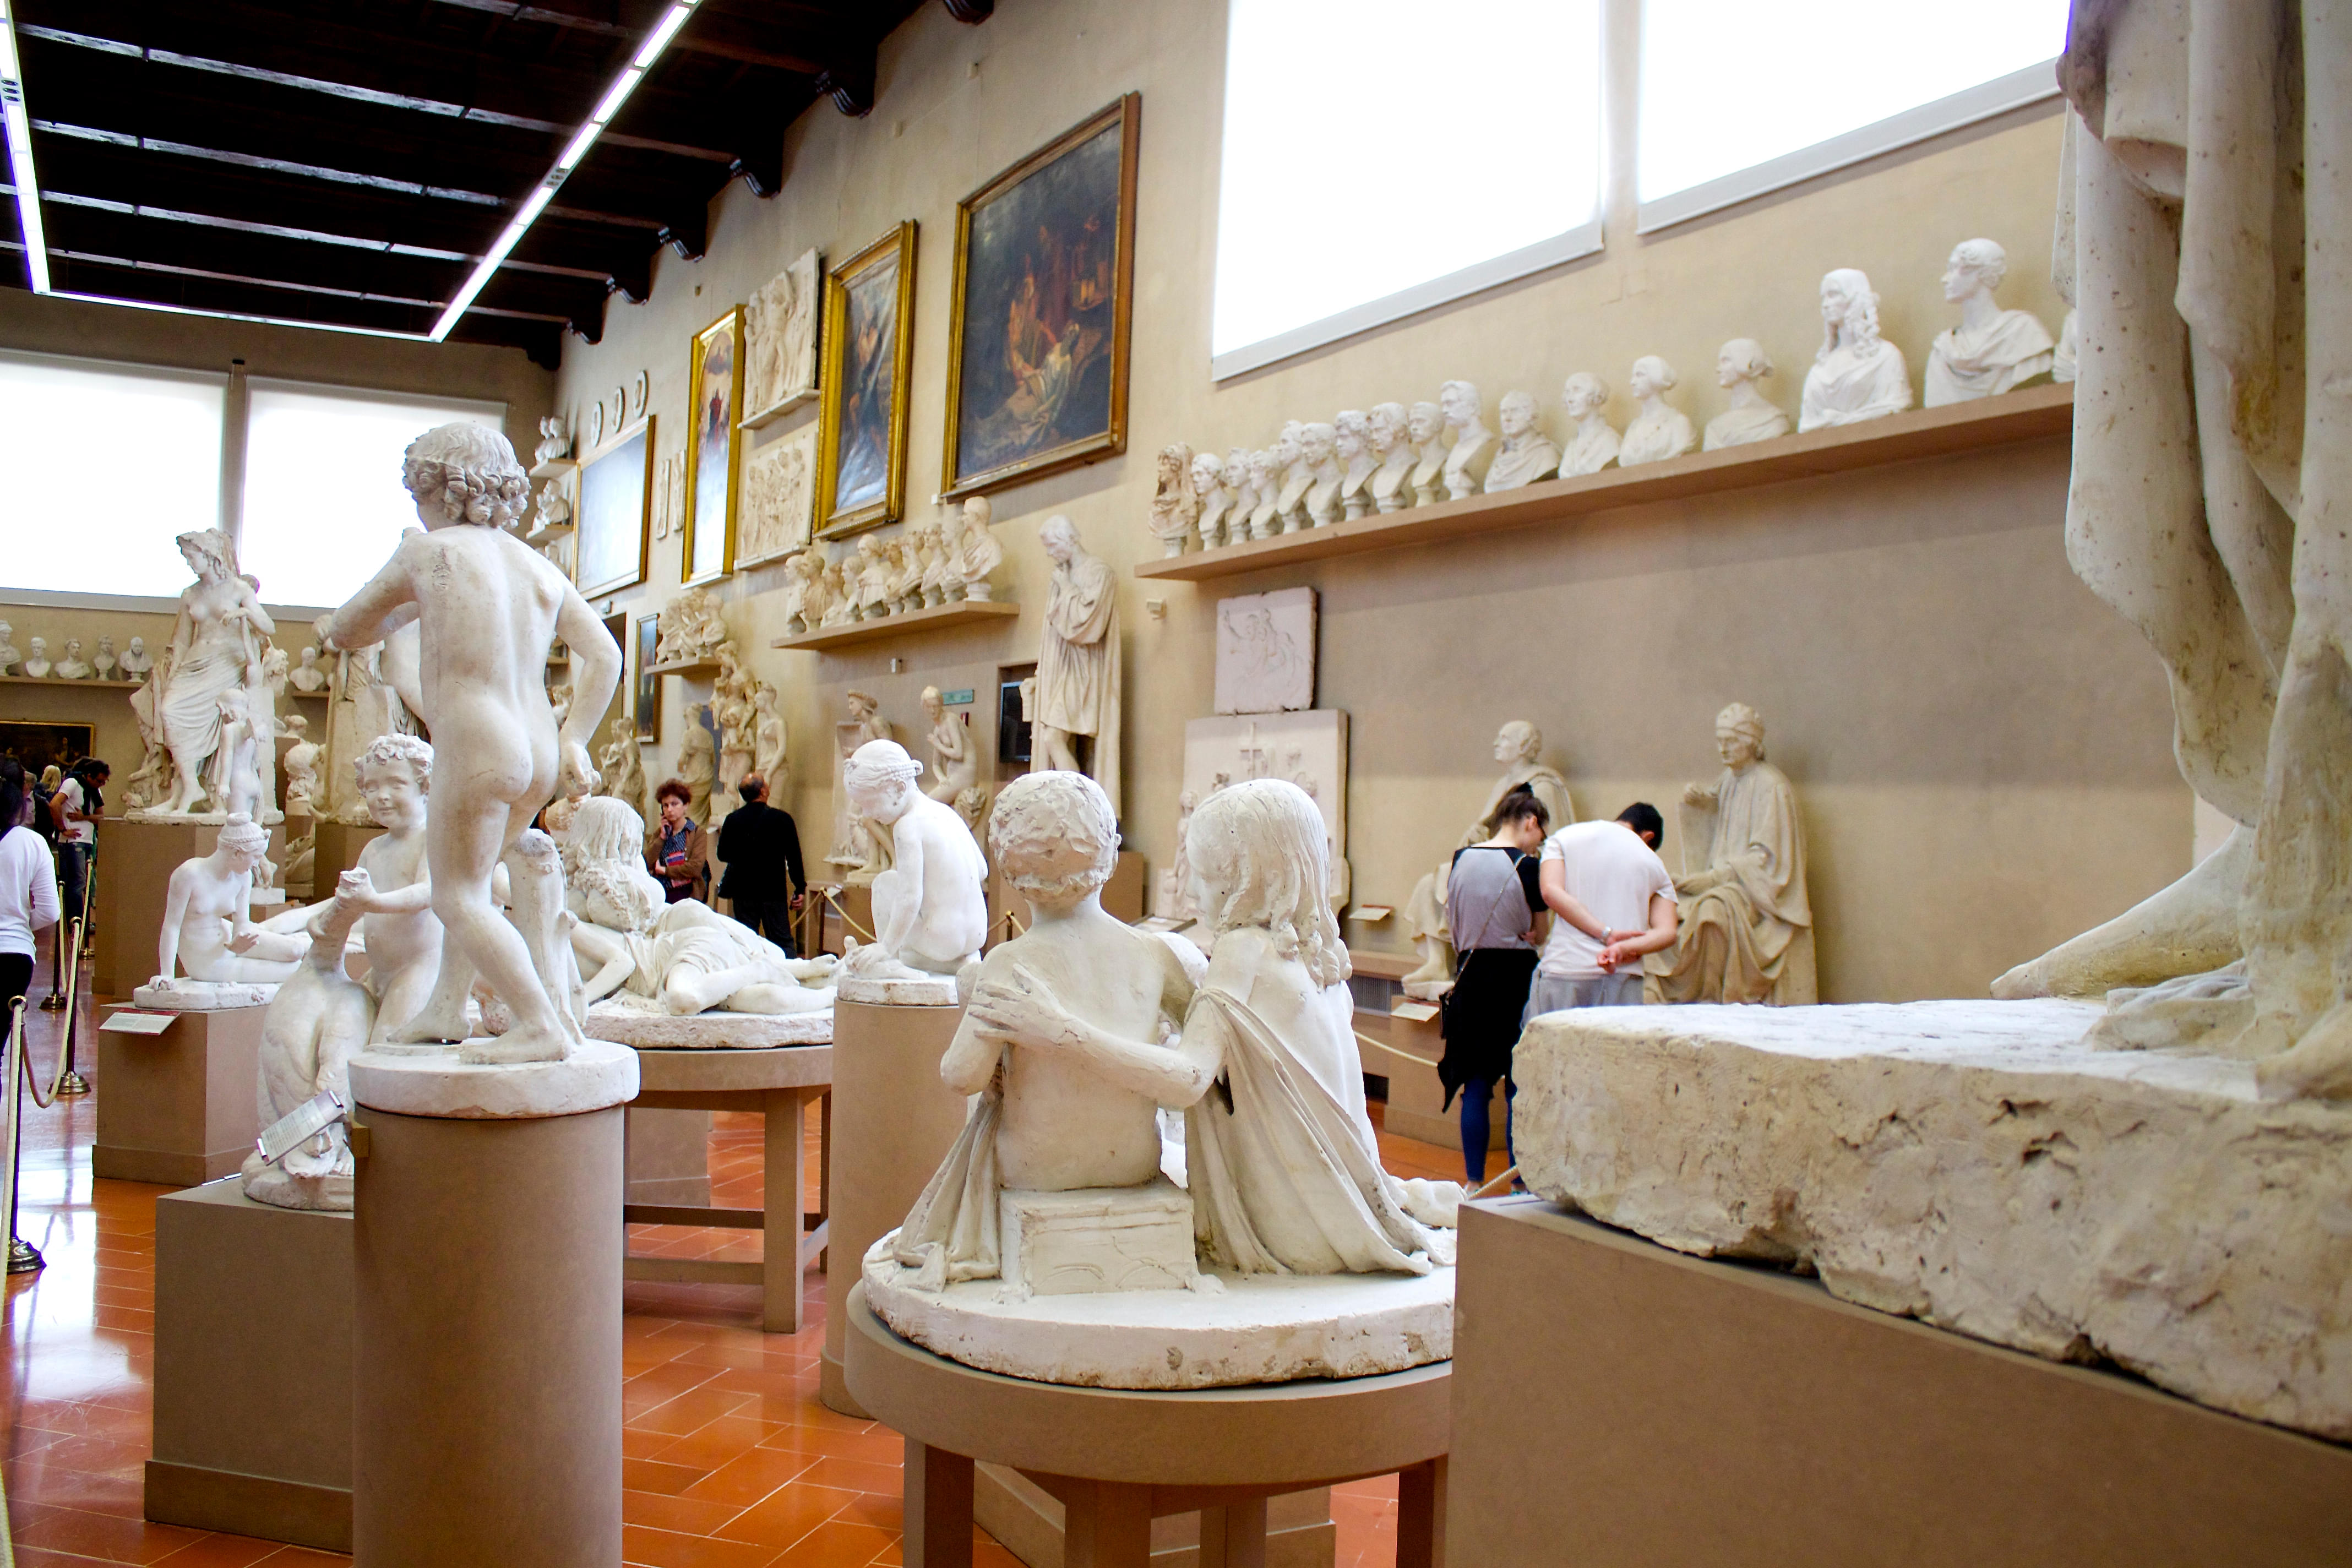 Architecture of Accademia Gallery